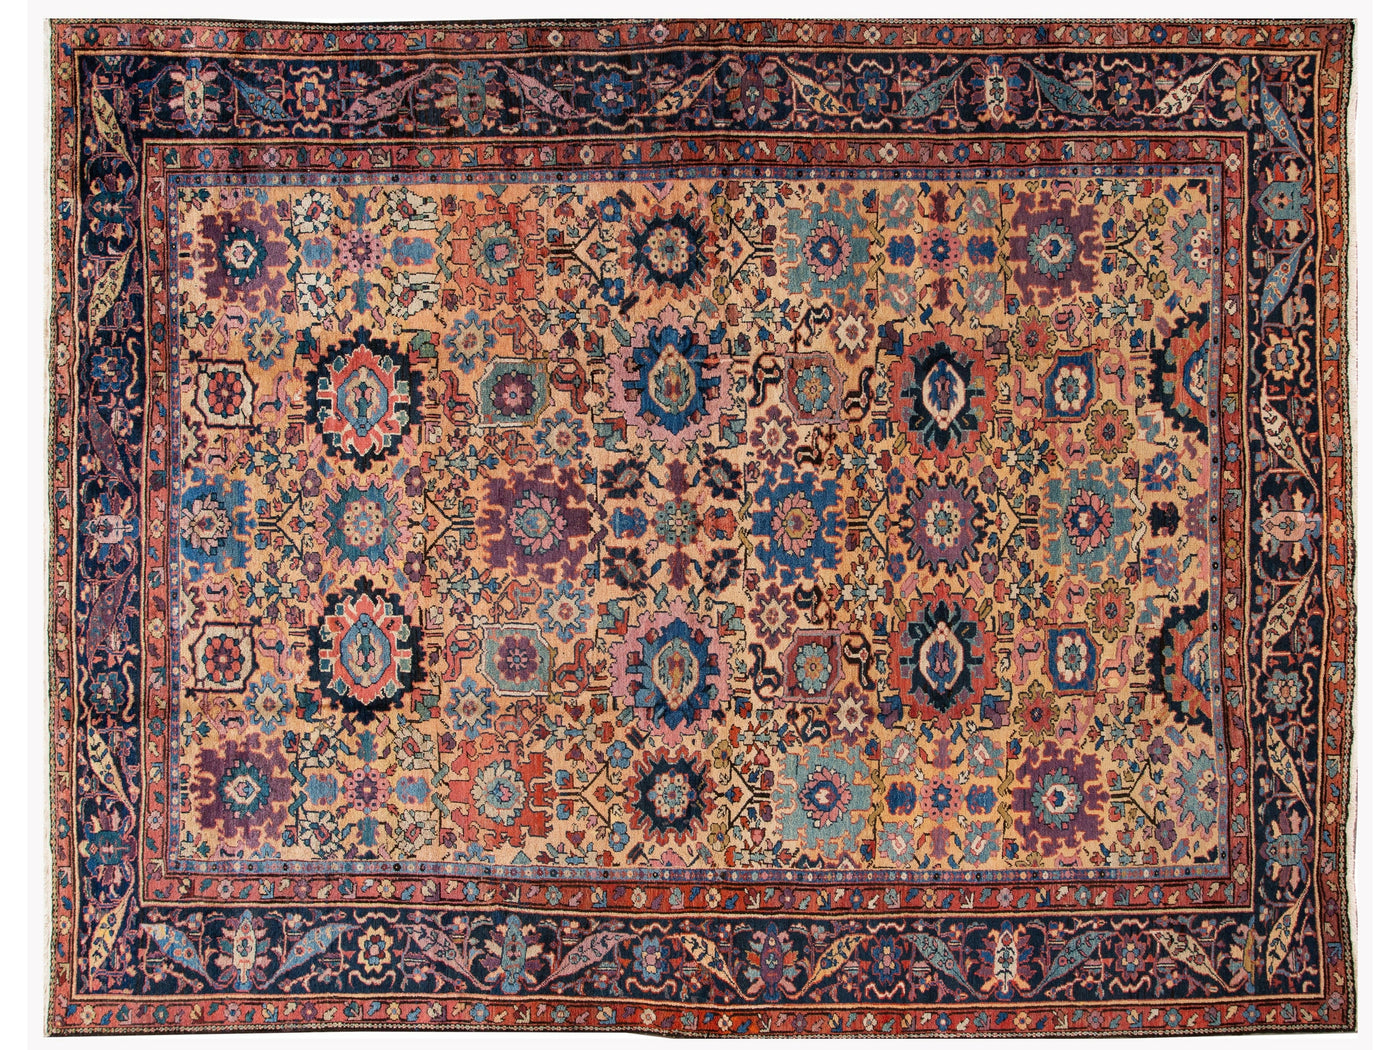 Antique Mahal Handmade Tan Wool Rug With Multicolor Floral Design